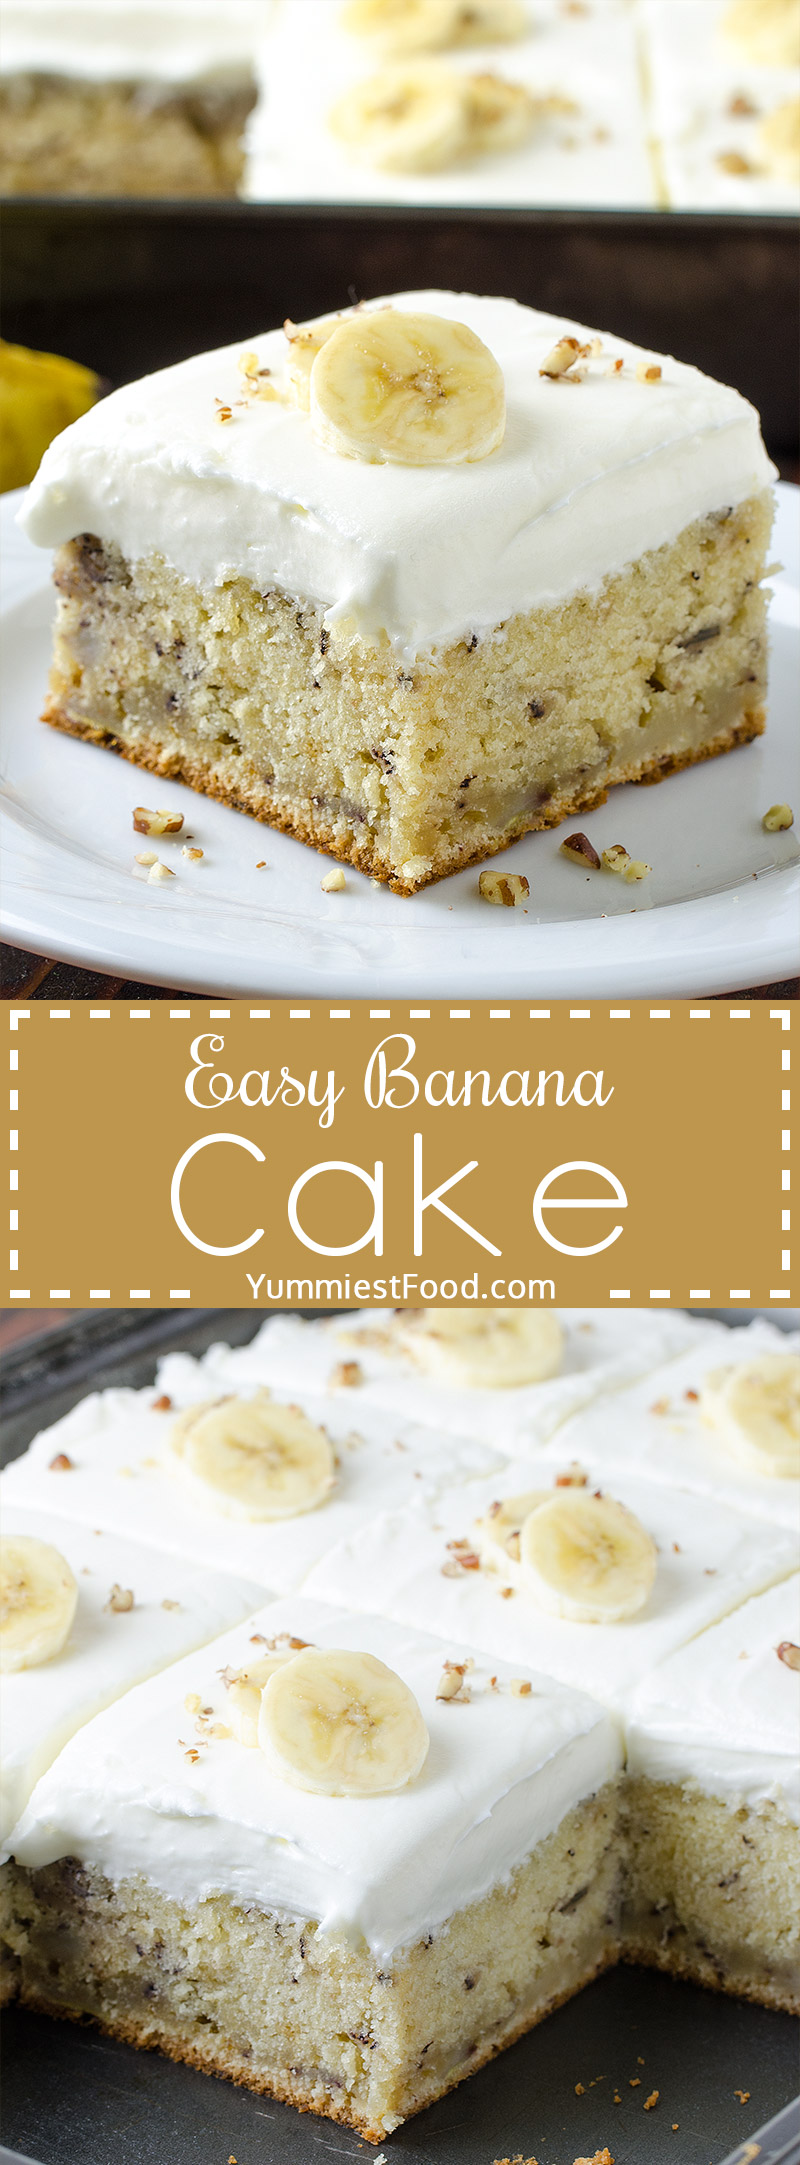 EASY BANANA CAKE - It's soft, sweet with the perfect amount of banana and it's topped with cream cheese frosting